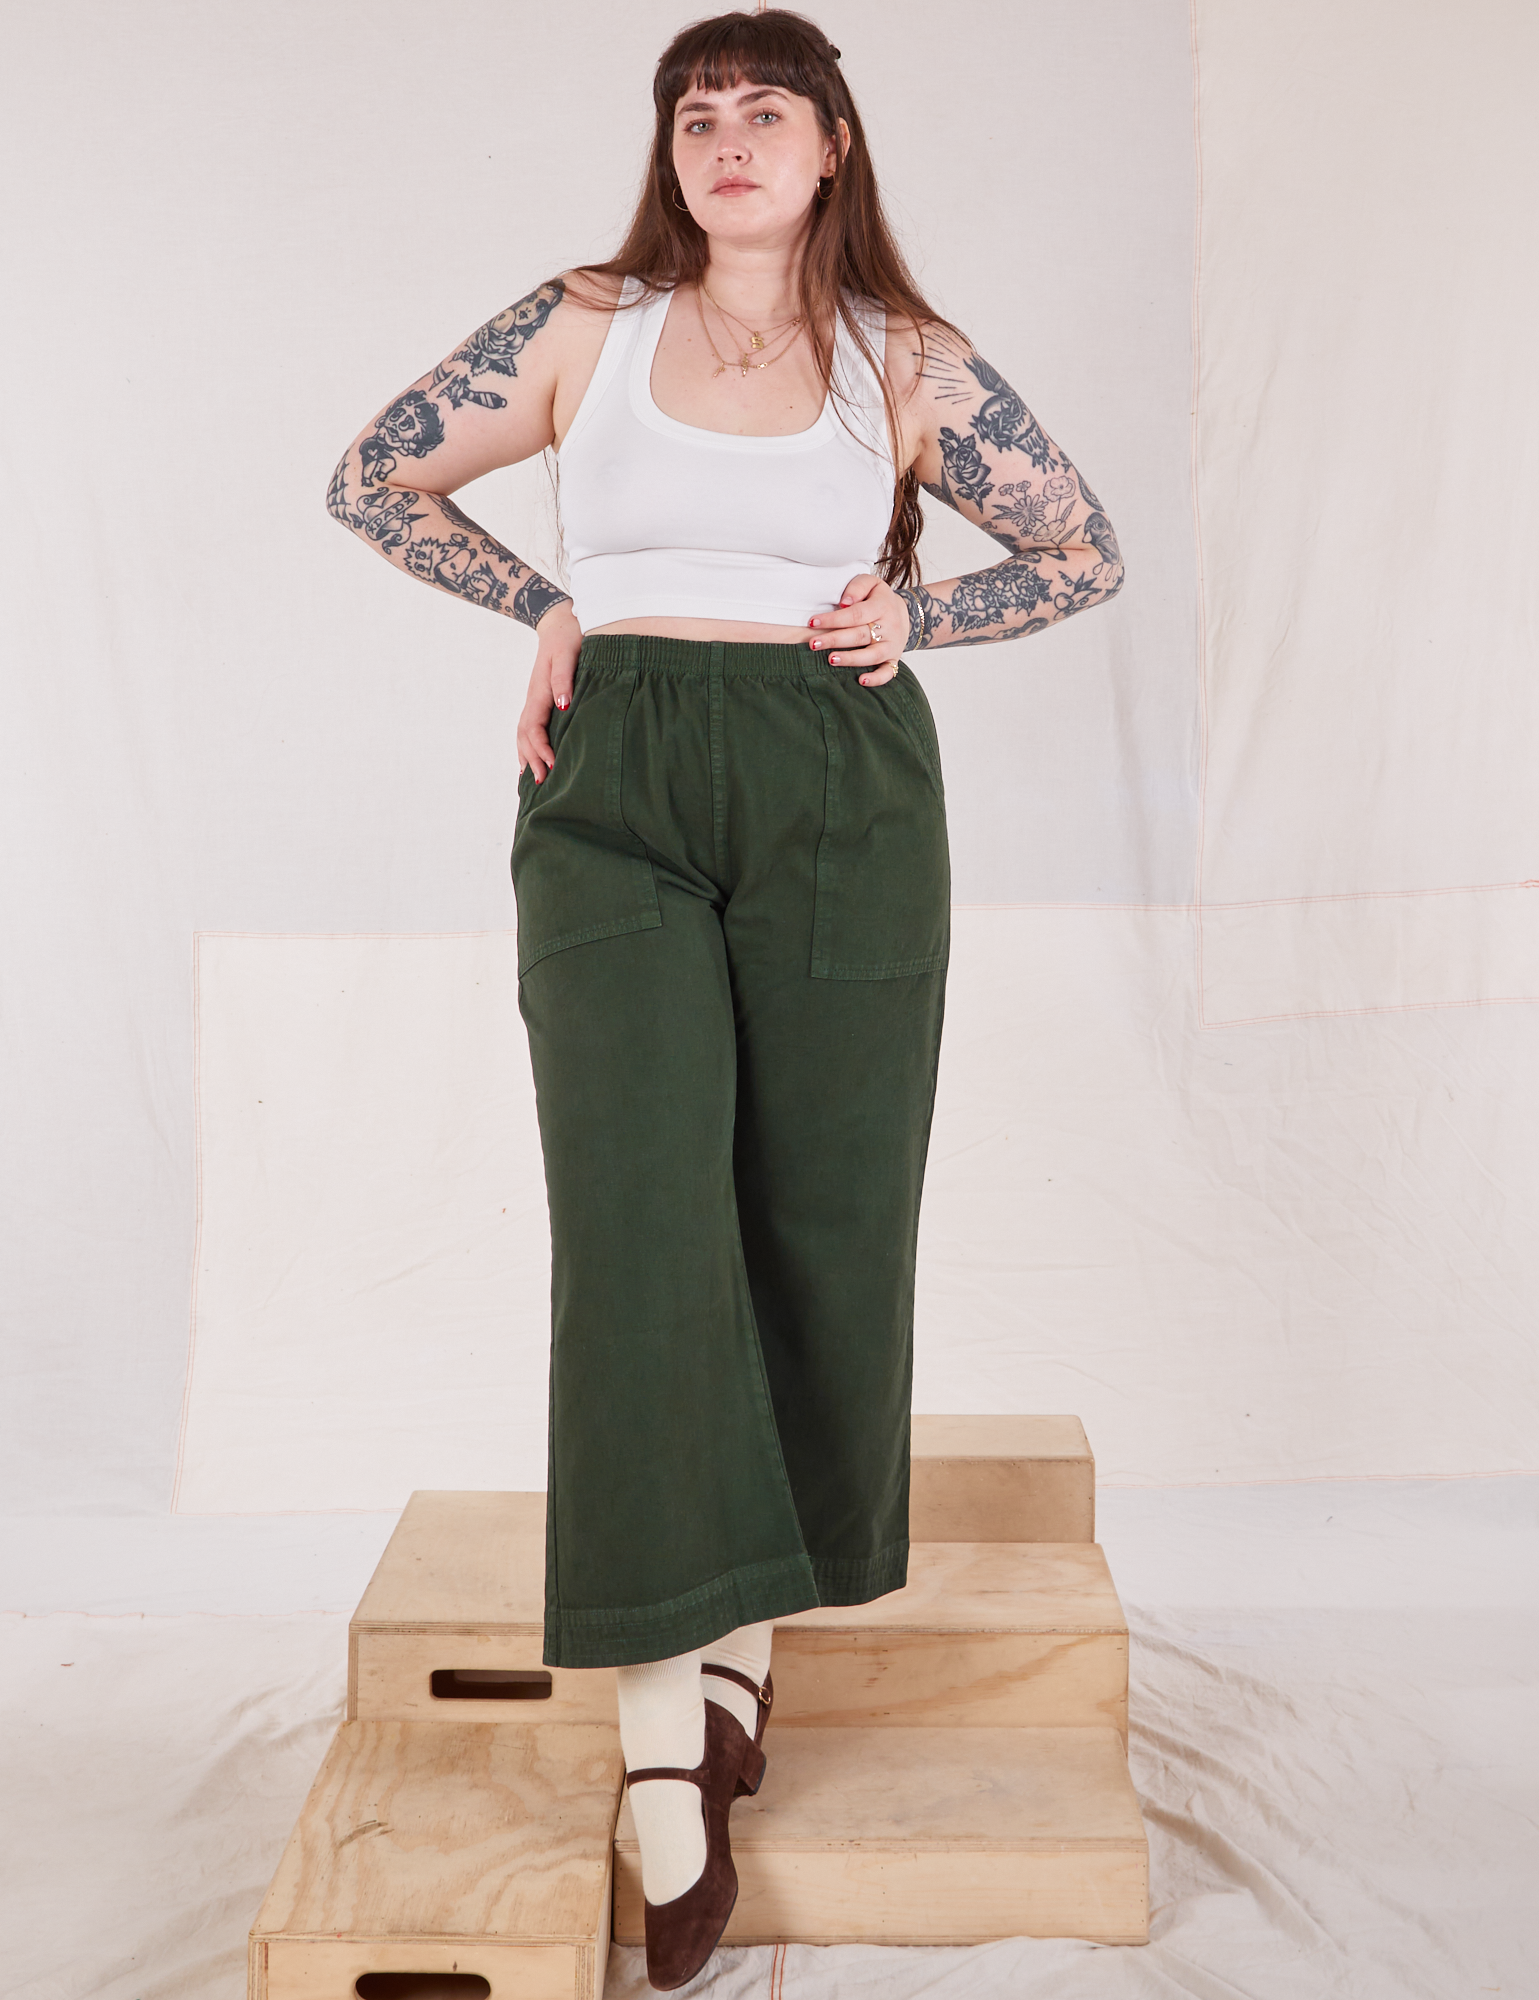 Sydney is 5'9" and wearing L Action Pants in Swamp Green paired with Cropped Tank in vintage tee off-white